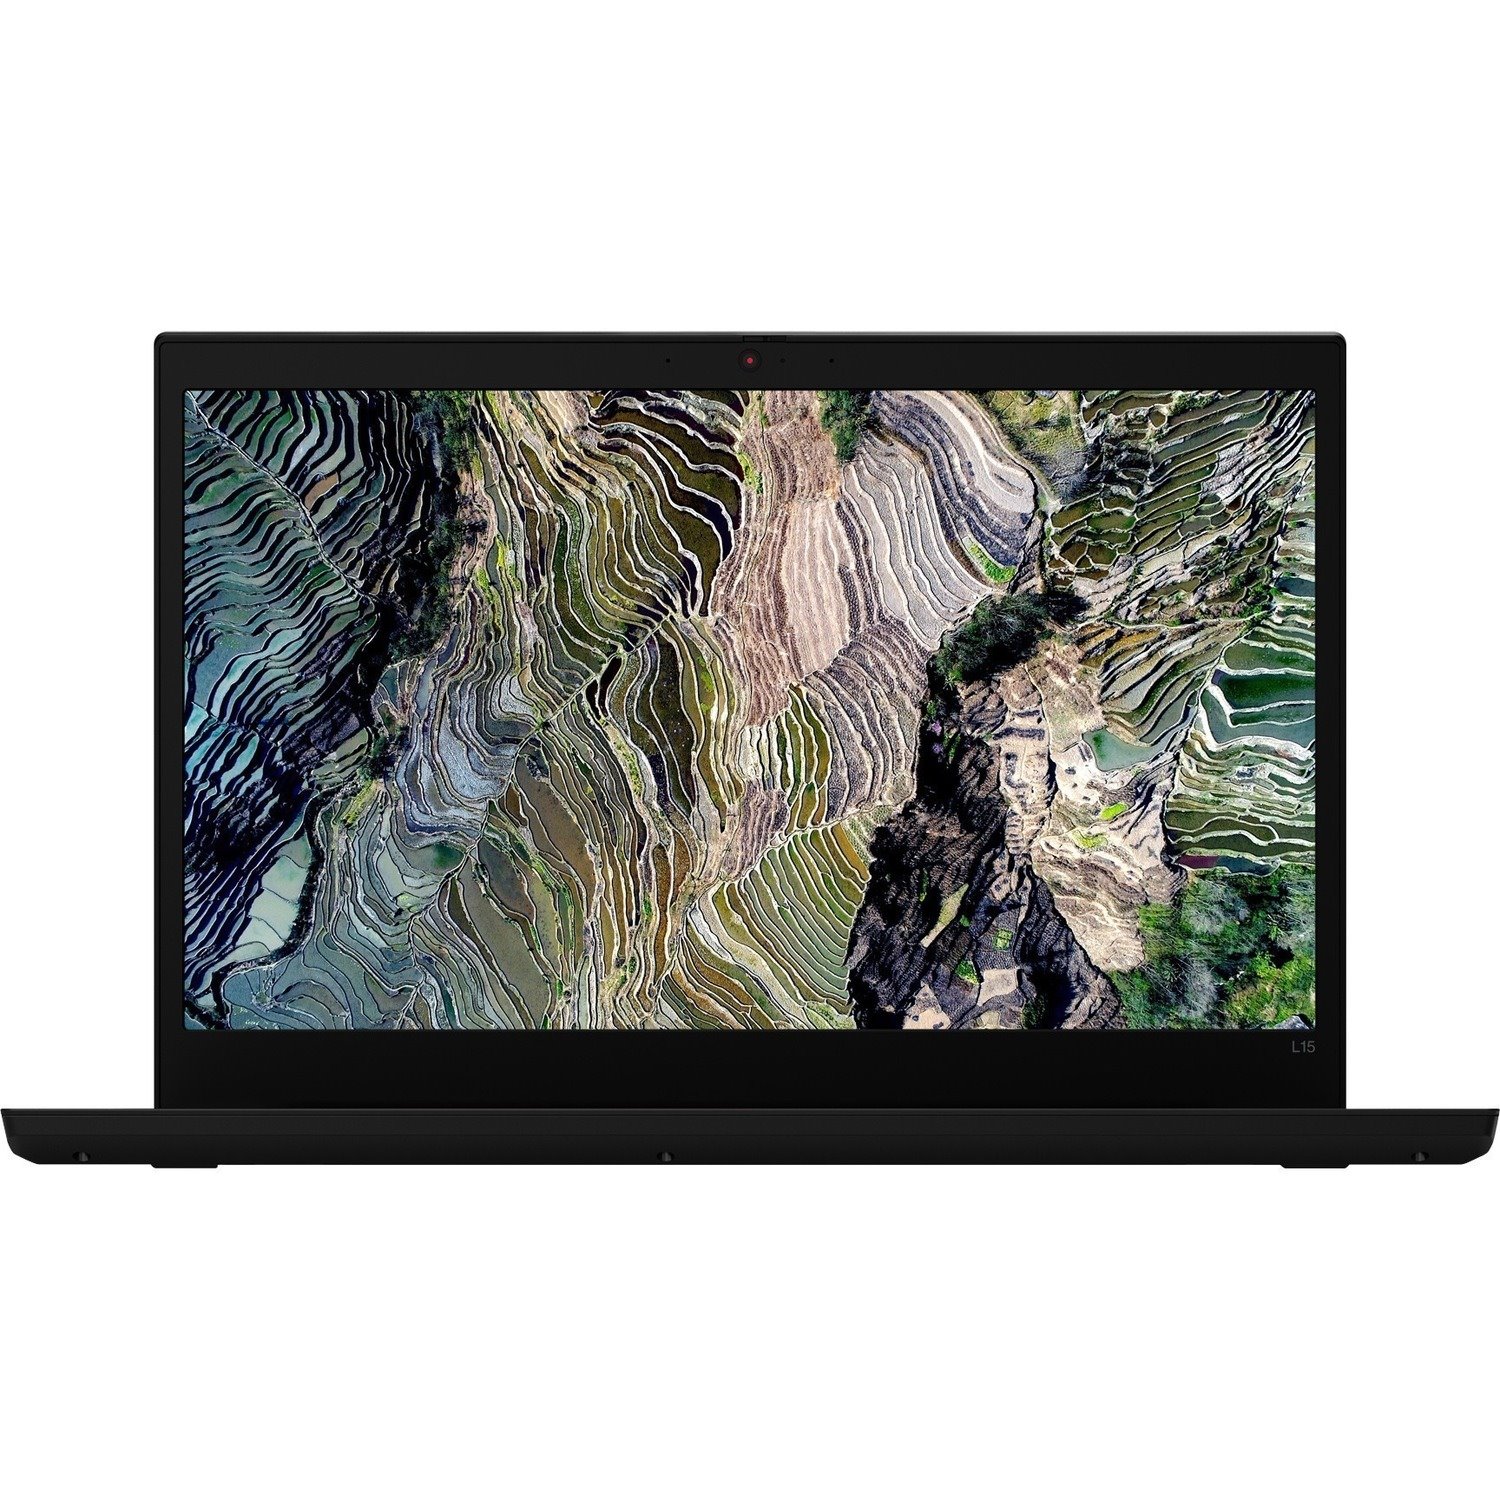 Lenovo ThinkPad L15 Gen2 20X300HDUS 15.6" Notebook - Full HD - 1920 x 1080 - Intel Core i7 11th Gen i7-1165G7 Quad-core (4 Core) 2.8GHz - 16GB Total RAM - 512GB SSD - Black - no ethernet port - not compatible with mechanical docking stations, only supports cable docking